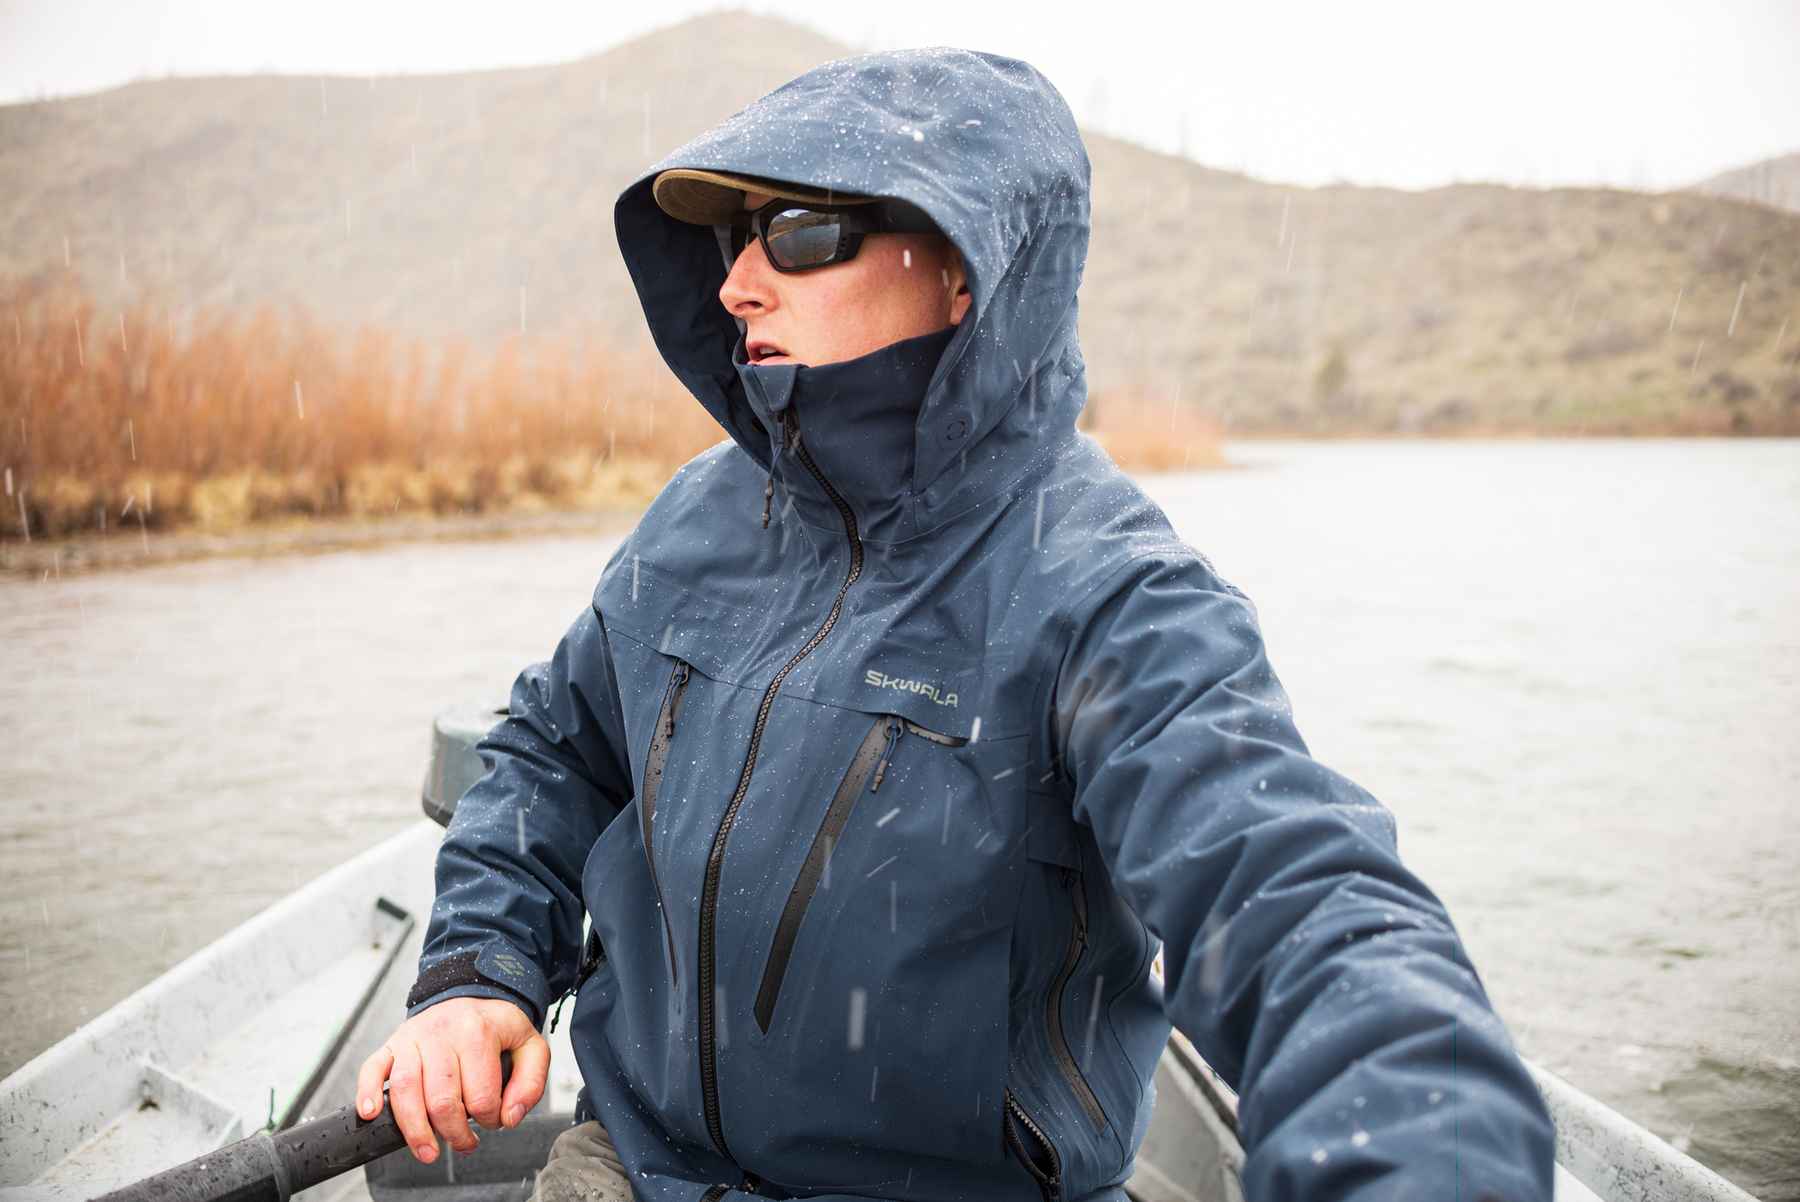 Gear Review: Orvis Encounter Wading Jacket - The Compleat Angler